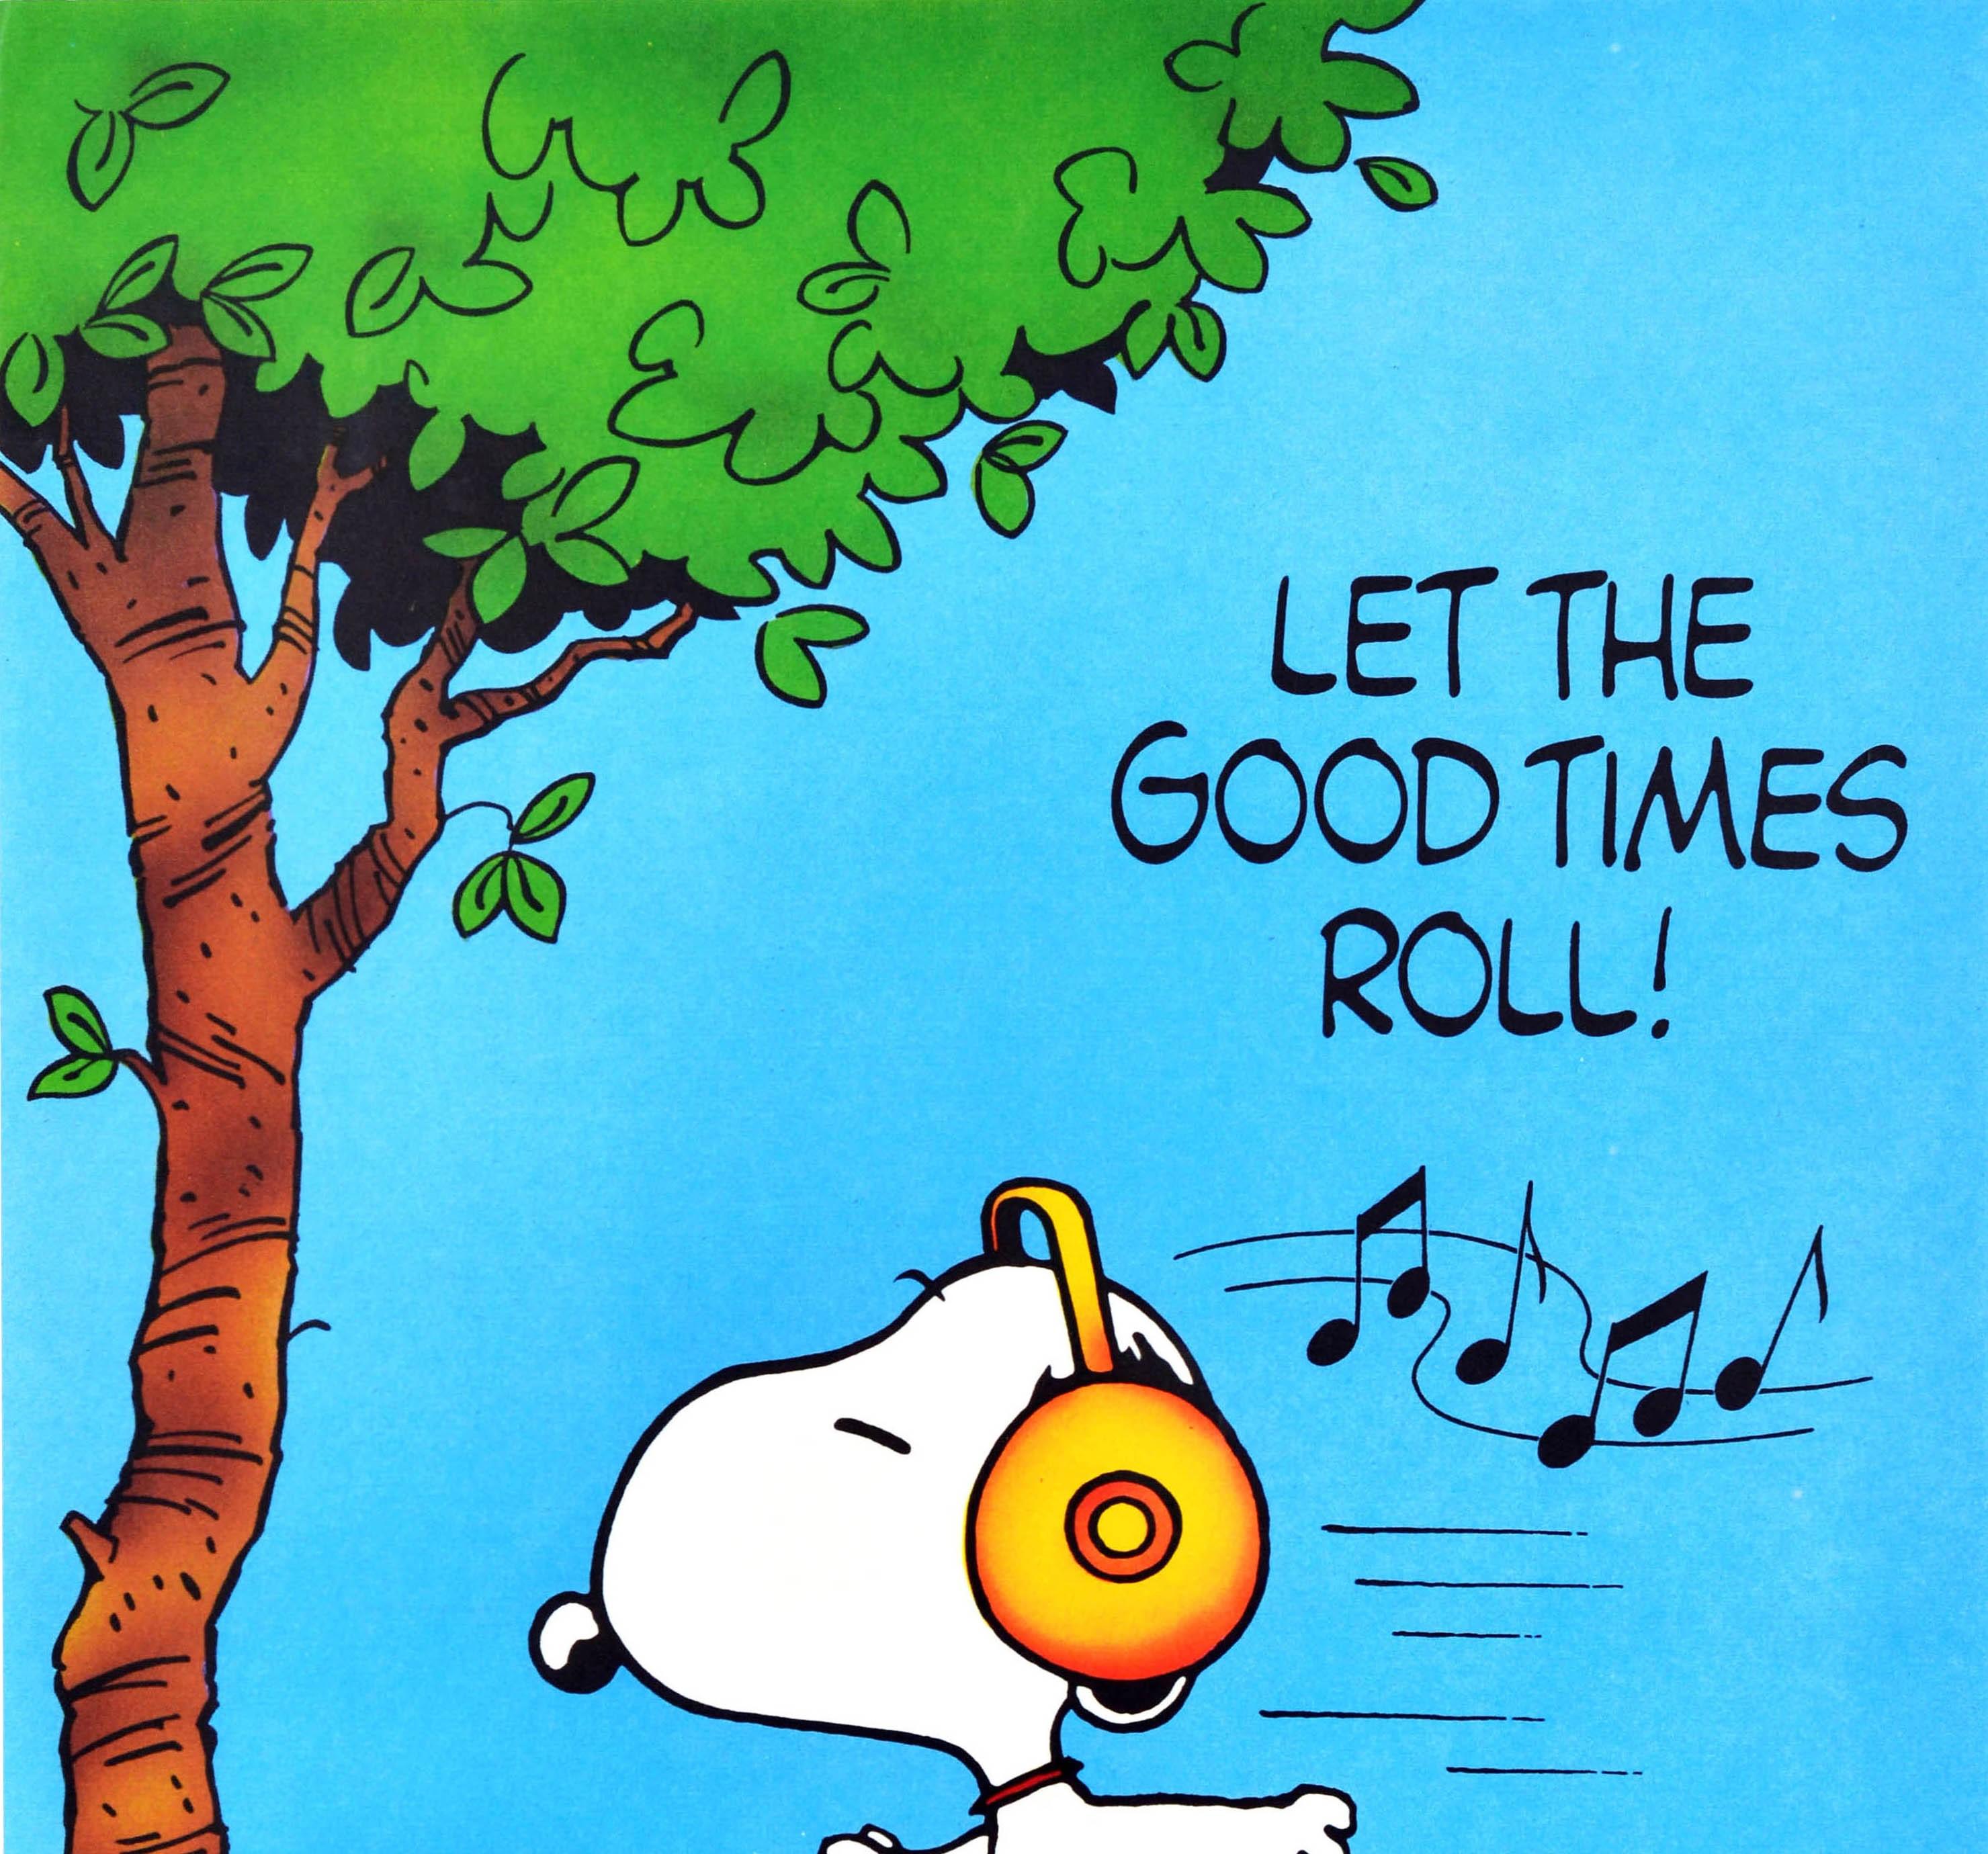 Original vintage poster featuring the iconic Peanuts comic character Snoopy the Dog by the notable American cartoonist Charles M. Schulz (Charles Monroe Schulz; 1922-2000) - Let The Good Times Roll! Fun and colourful design depicting Snoopy roller